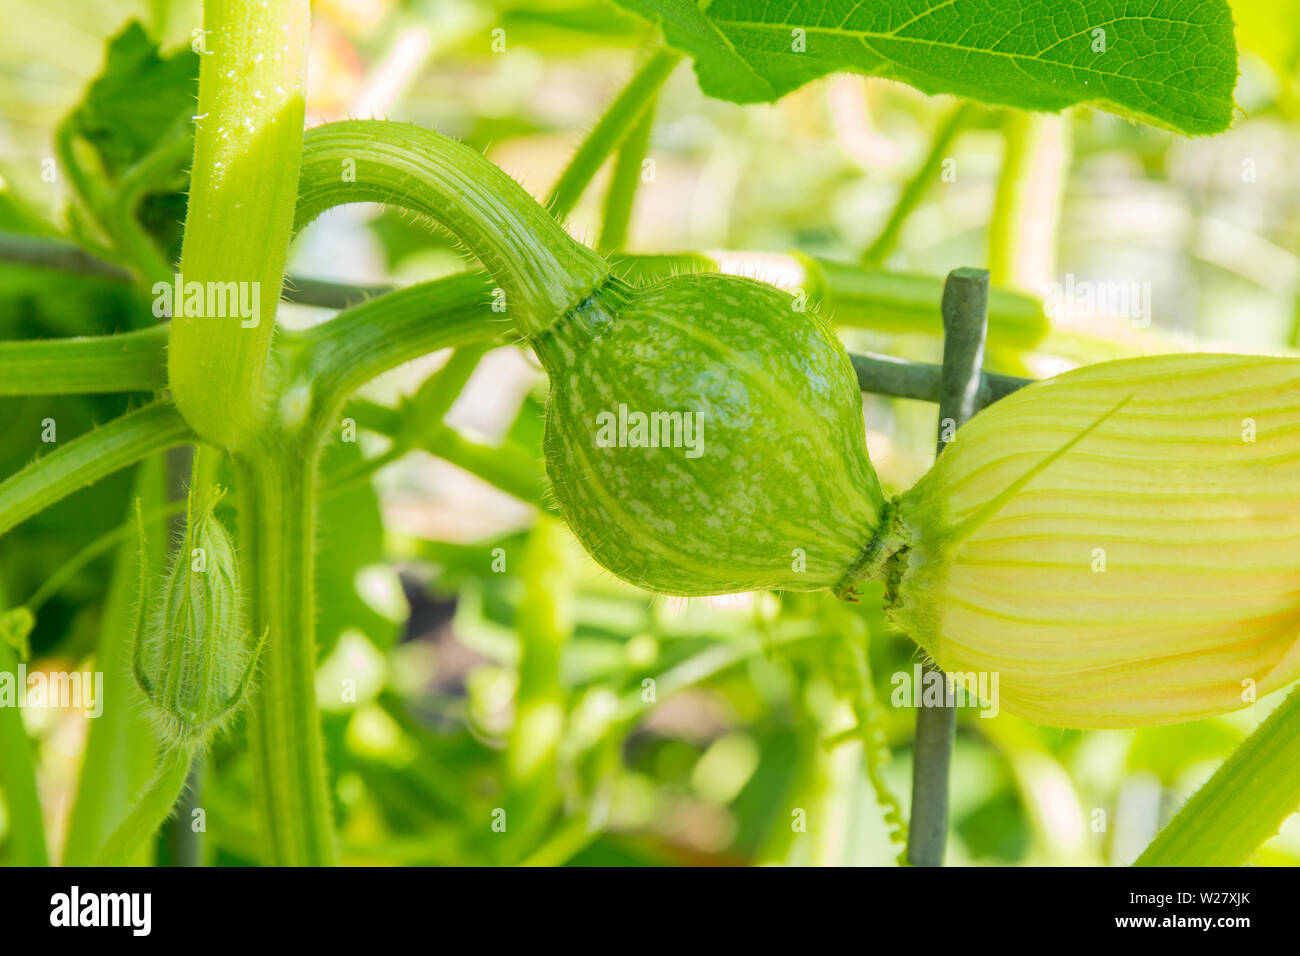 Close-up of a Discus Bush Buttercup squash growing in Bellevue, Washington, USA.  It is the best full-sized buttercup on the market that is produced o Stock Photo